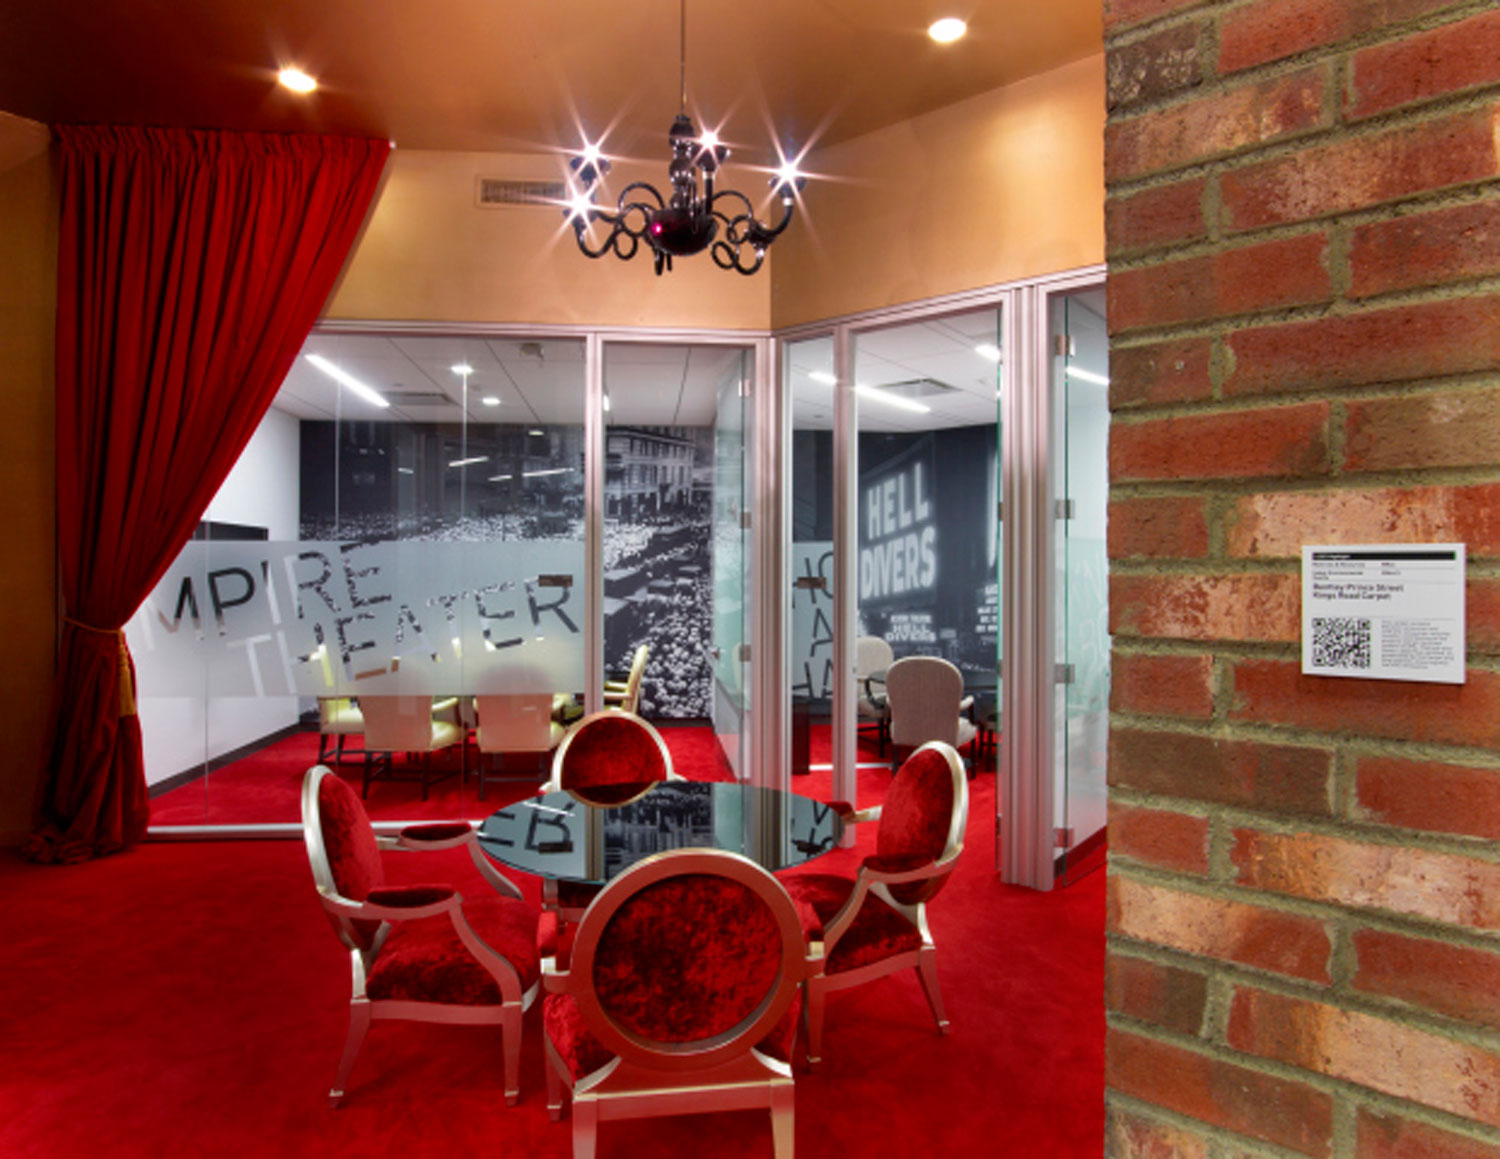 The Broadway themed conference rooms on Google's New York City-themed floor.